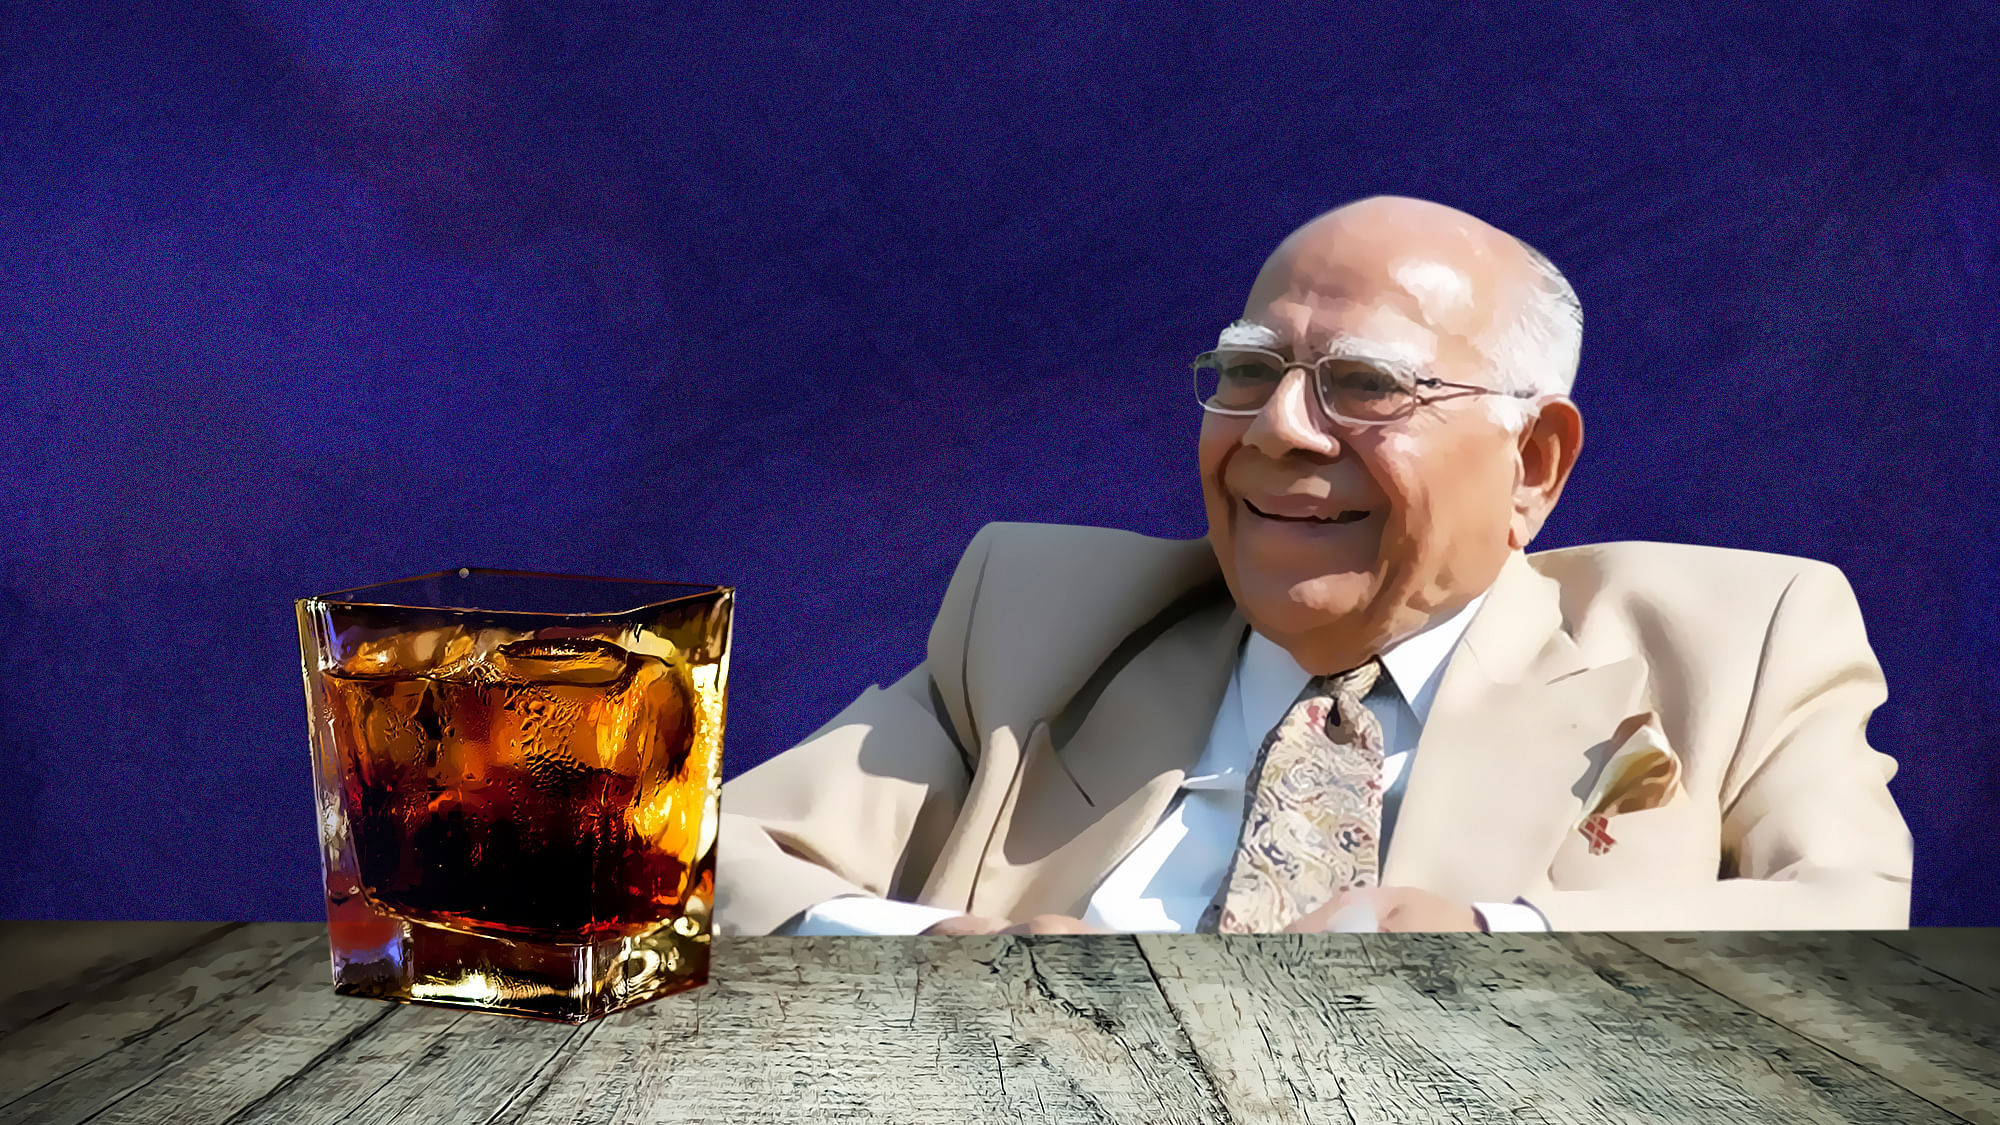 Even as Ram Jethmalani says withmirth, he can resolve India-Pak crisis while having whisky, is it really that easy? (Photo: Rhythum Seth/<b> The Quint)</b>